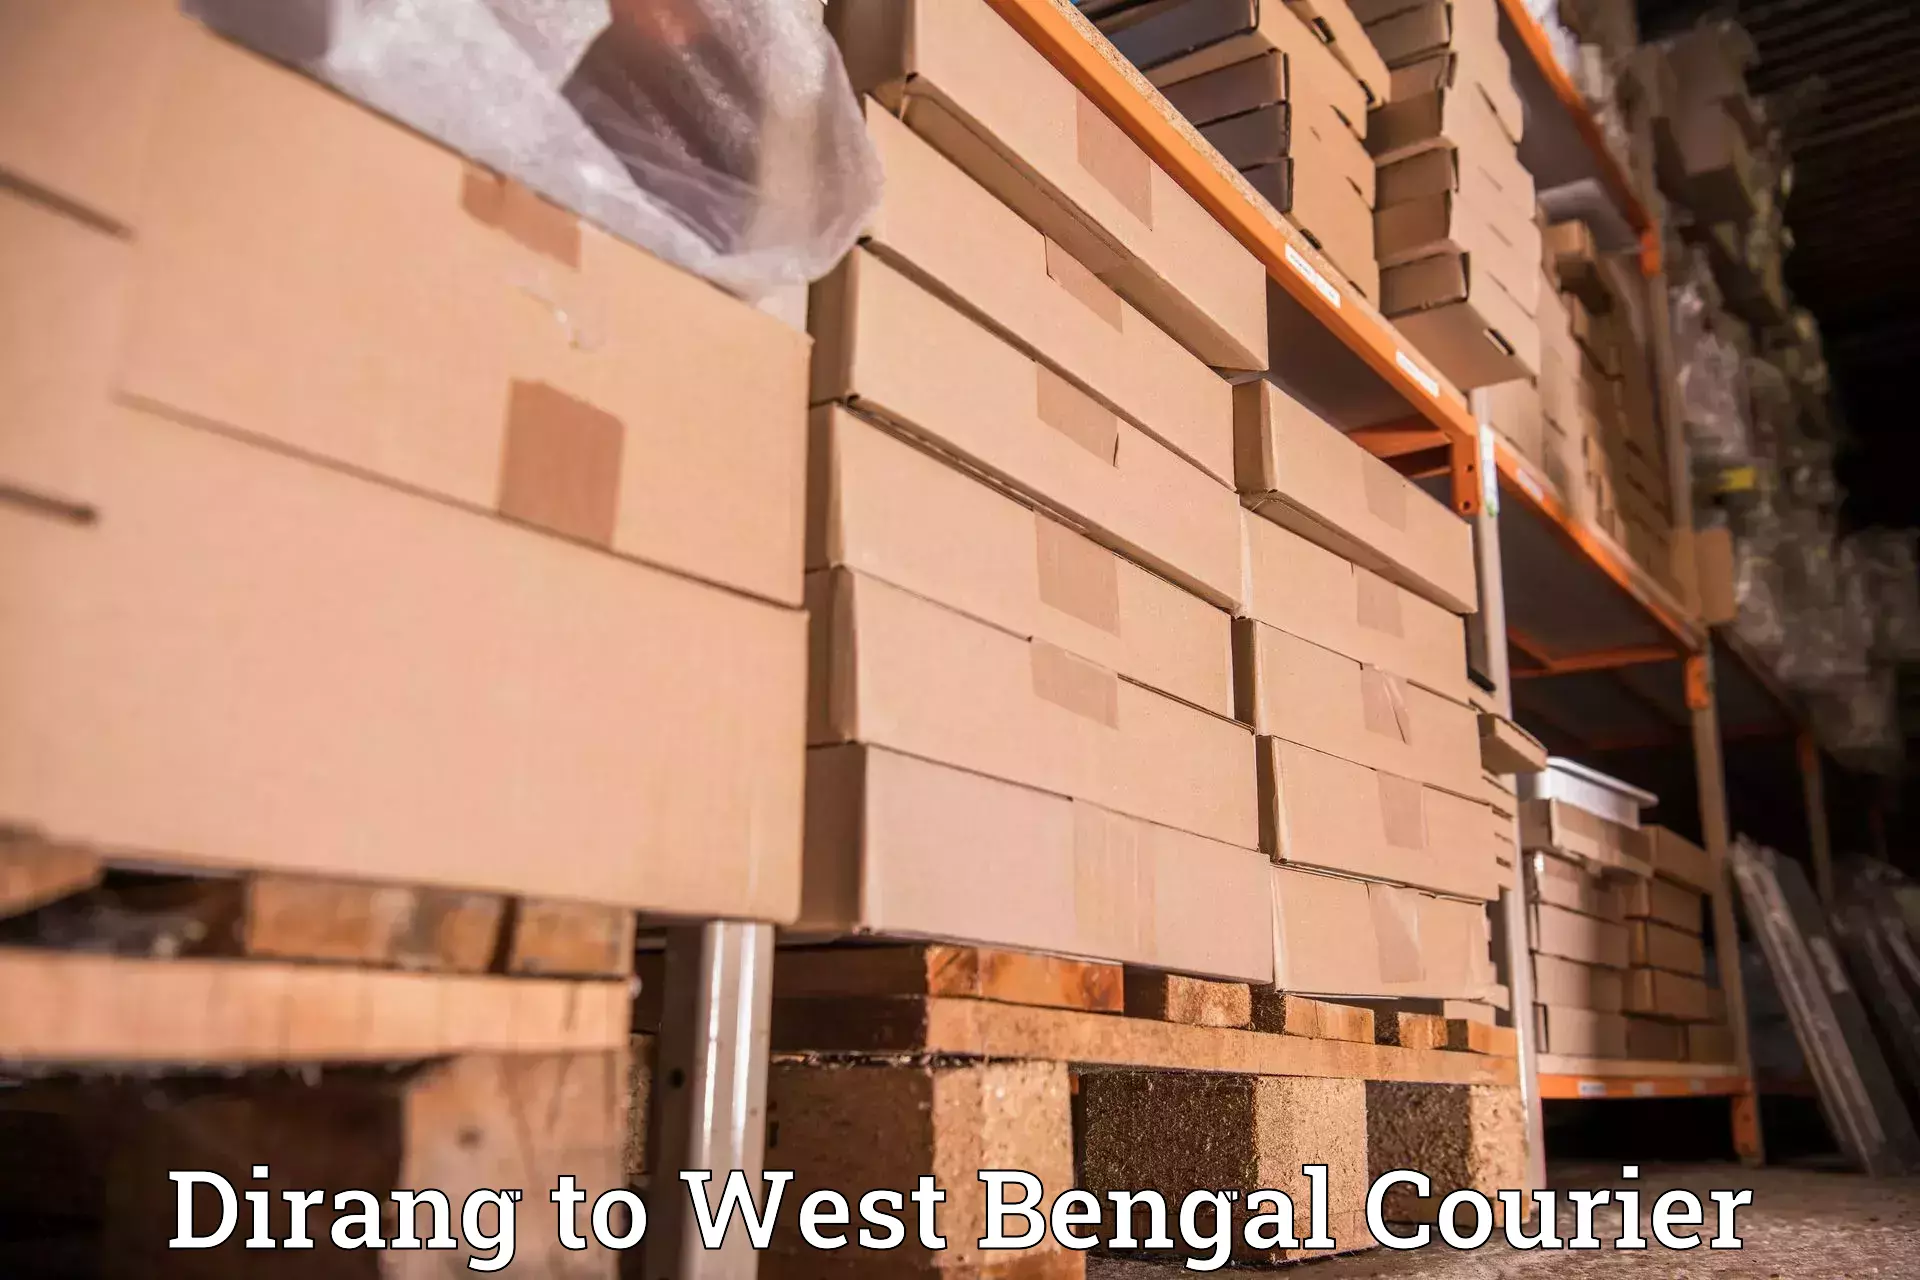 Nationwide parcel services Dirang to West Bengal